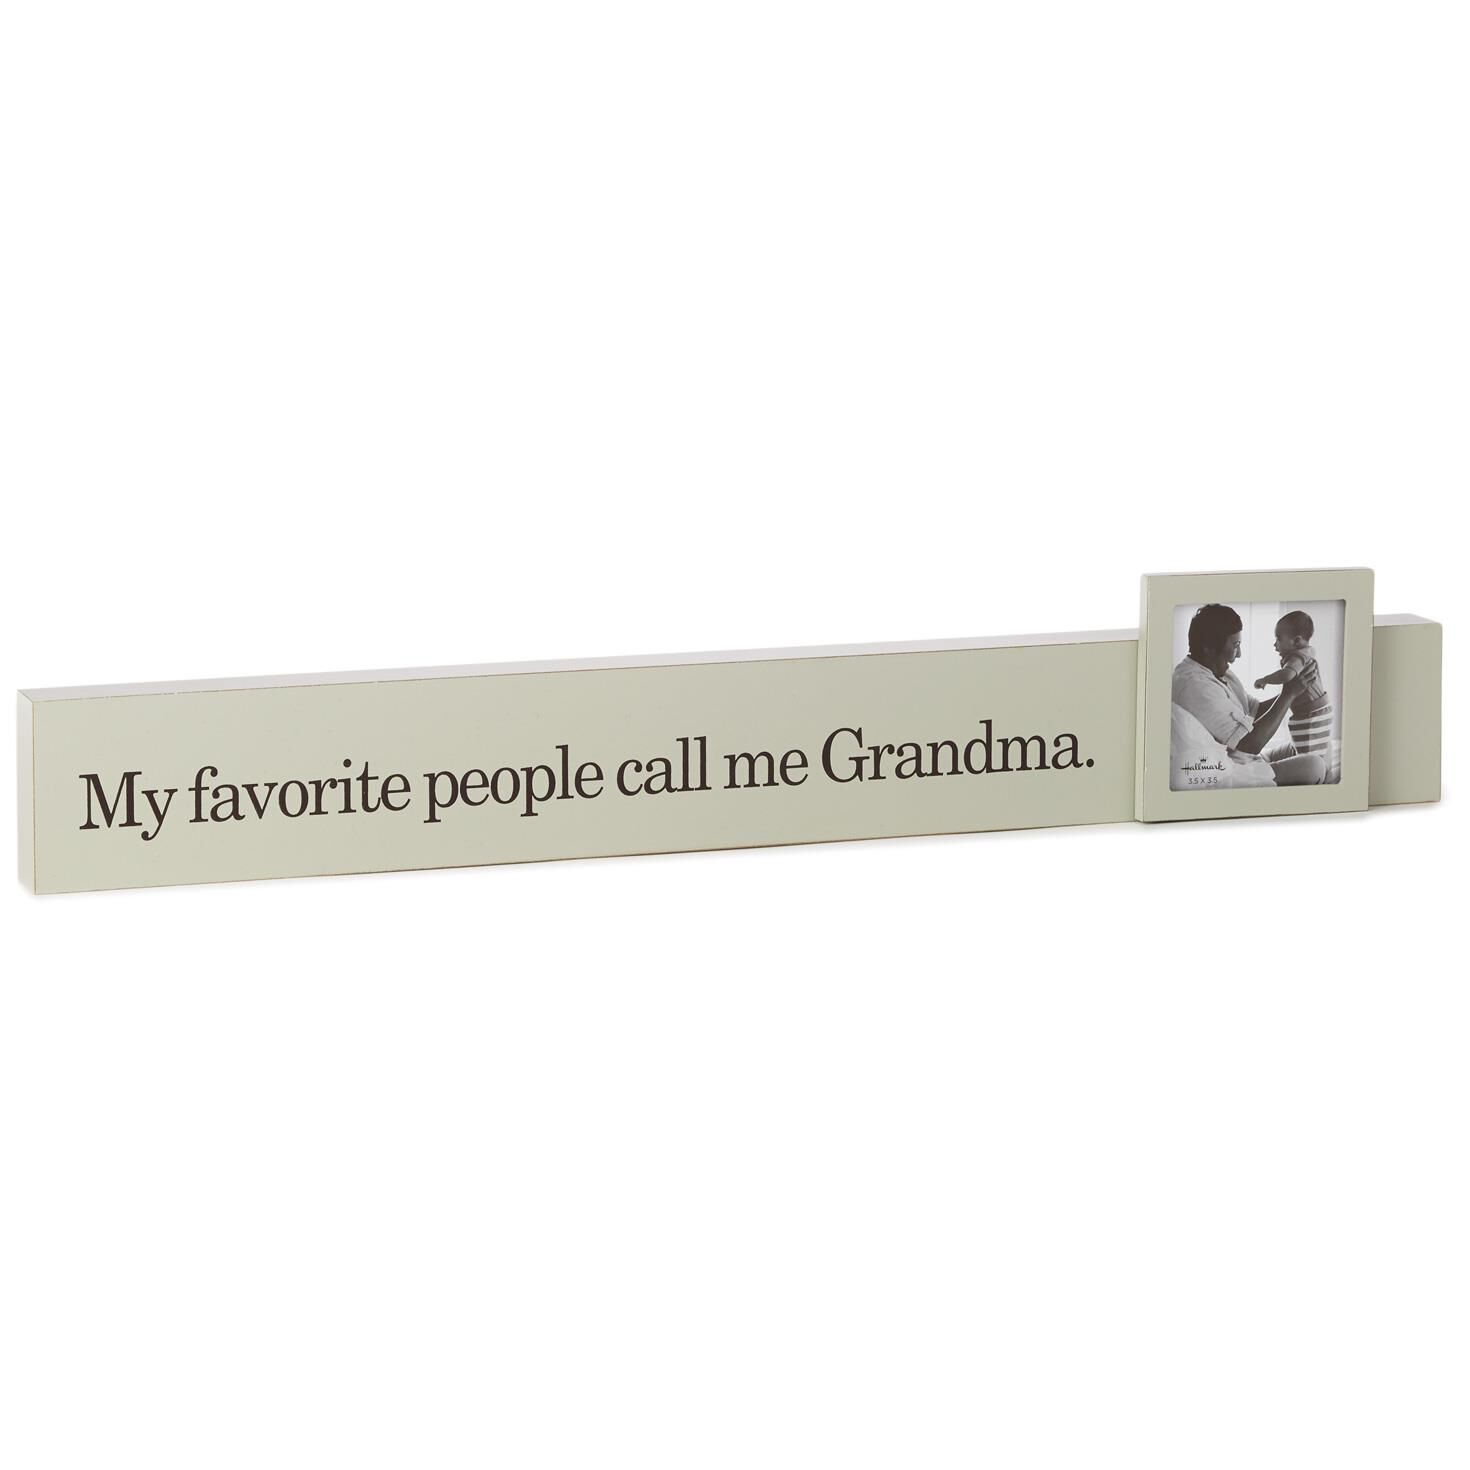 Where can you get a list of grandparent pet names?